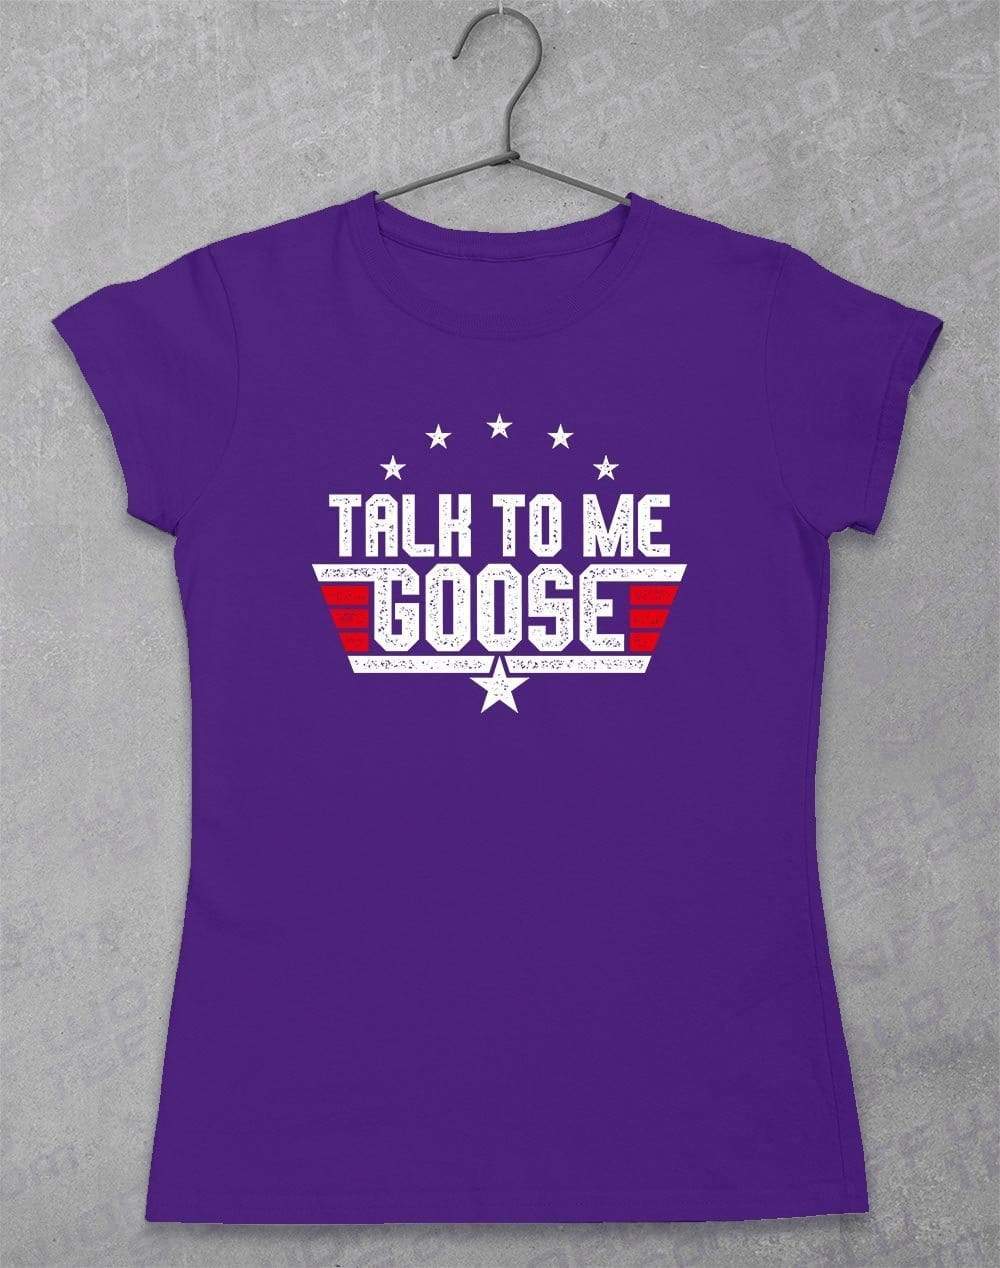 Talk to me Goose - Women's T-Shirt 8-10 / Lilac  - Off World Tees